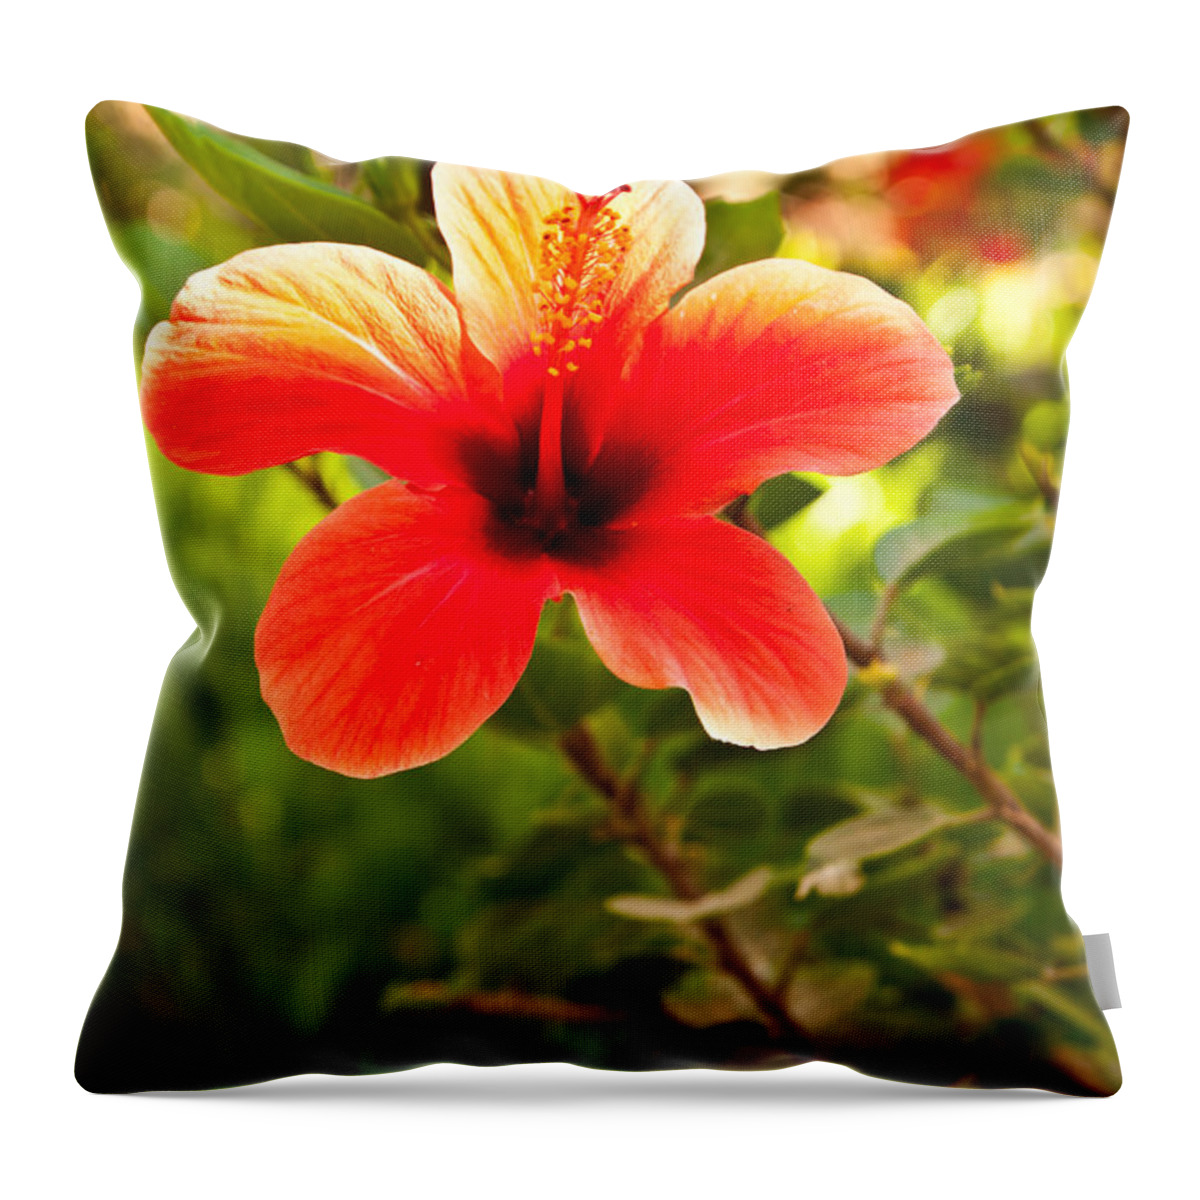  Throw Pillow featuring the photograph Red Flower by James Gay